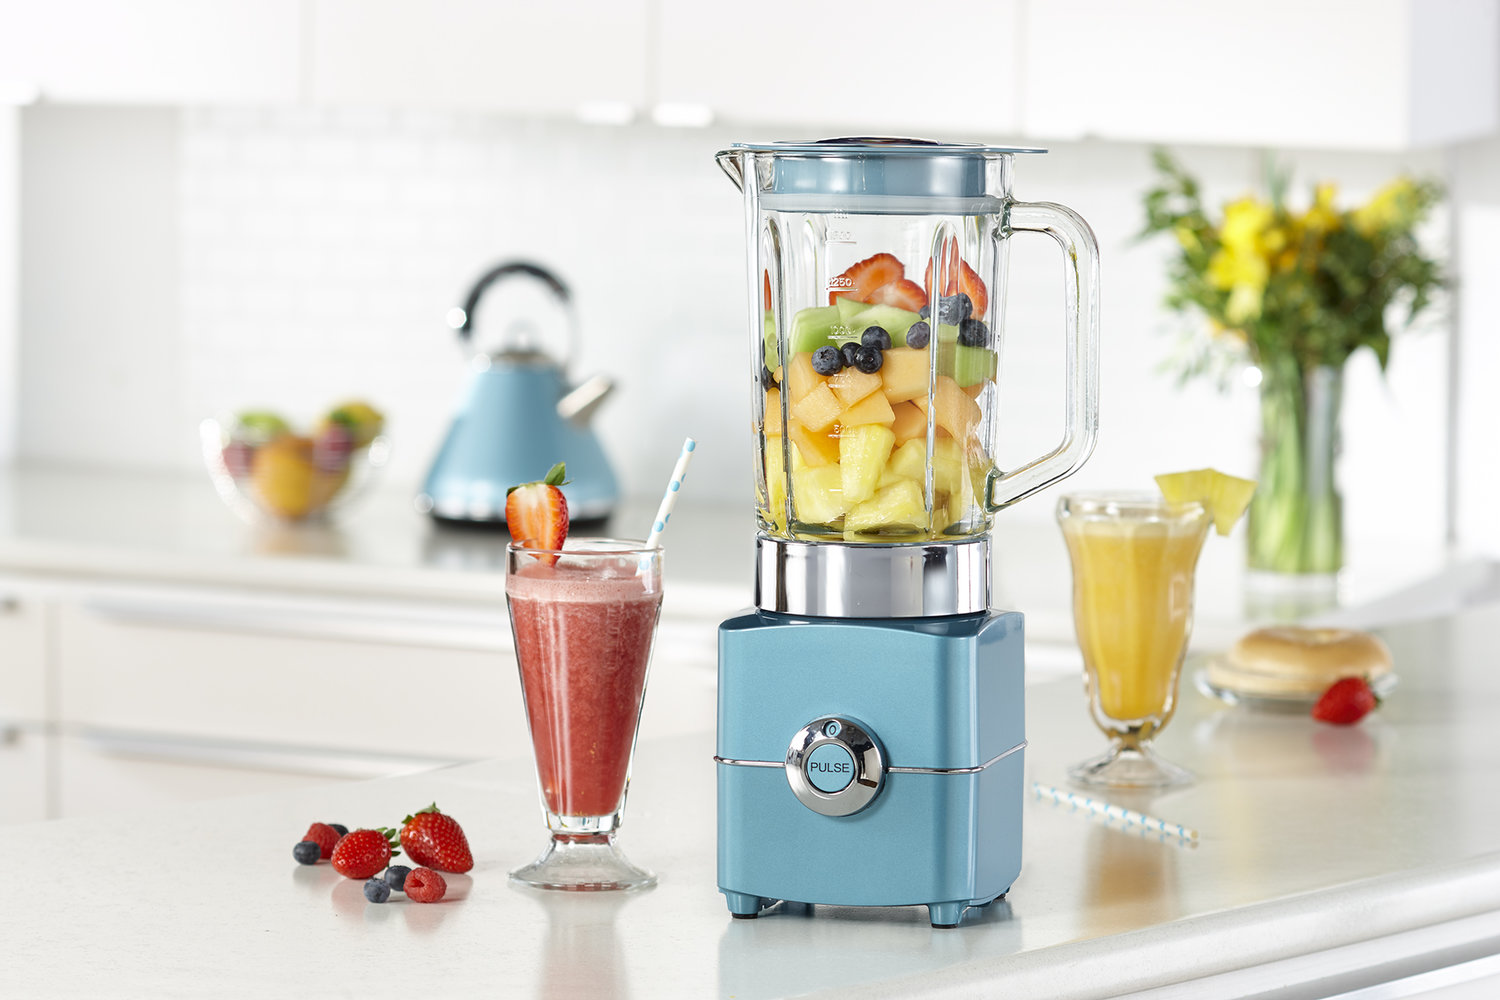 Sorry, You’re Not a Grown-Up If You Don’t Own at Least 13/25 of These Kitchen Things Blender